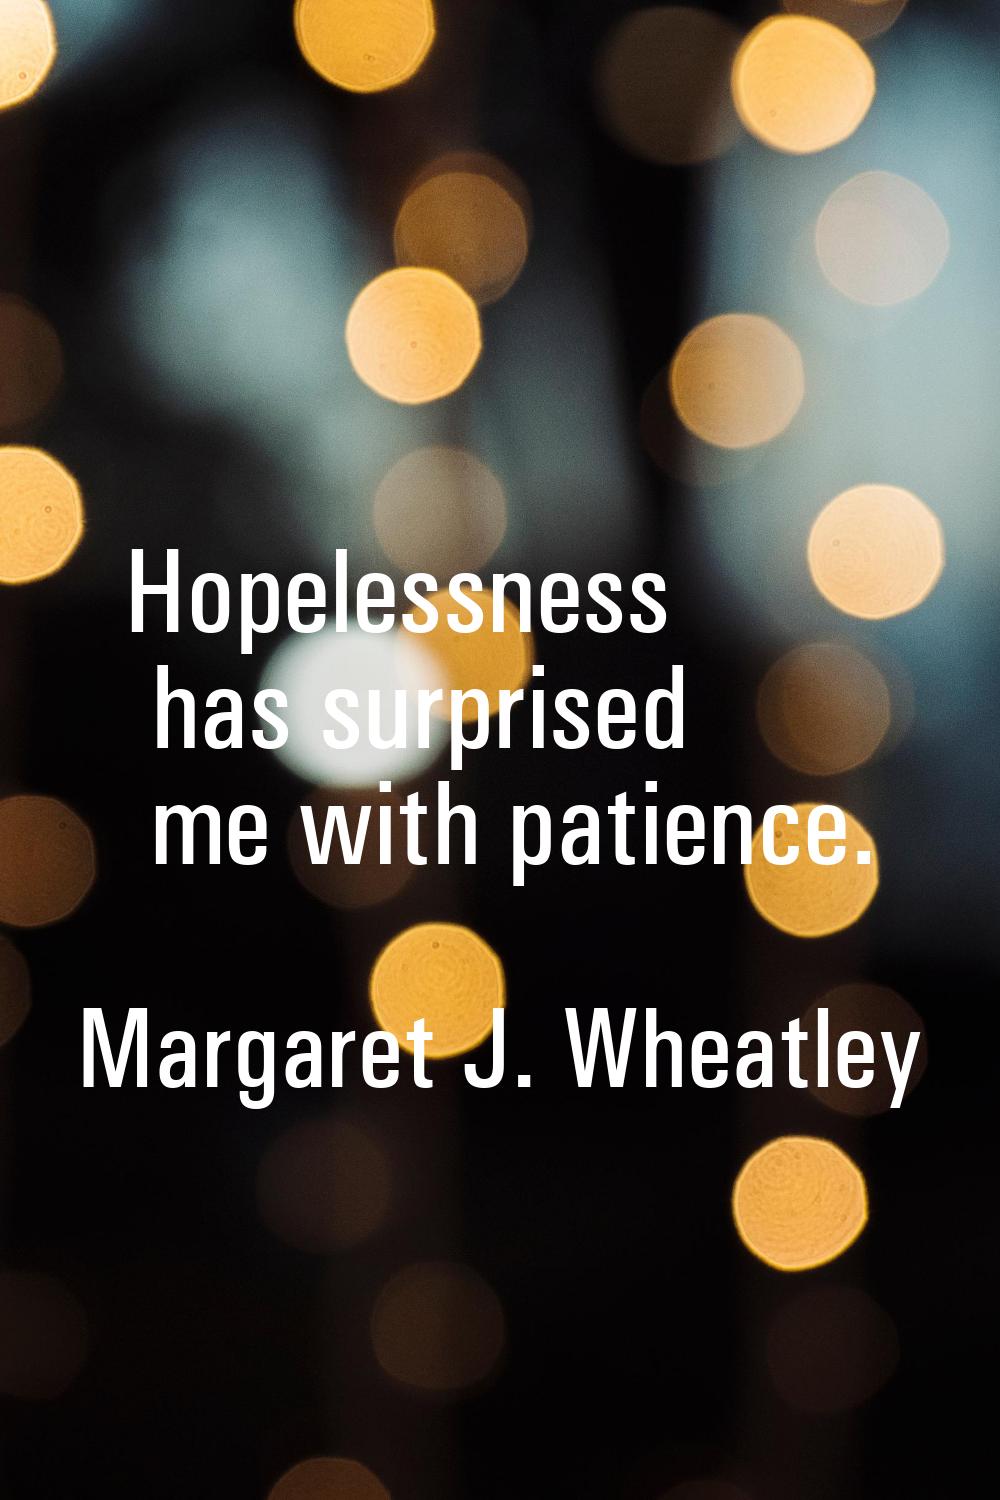 Hopelessness has surprised me with patience.